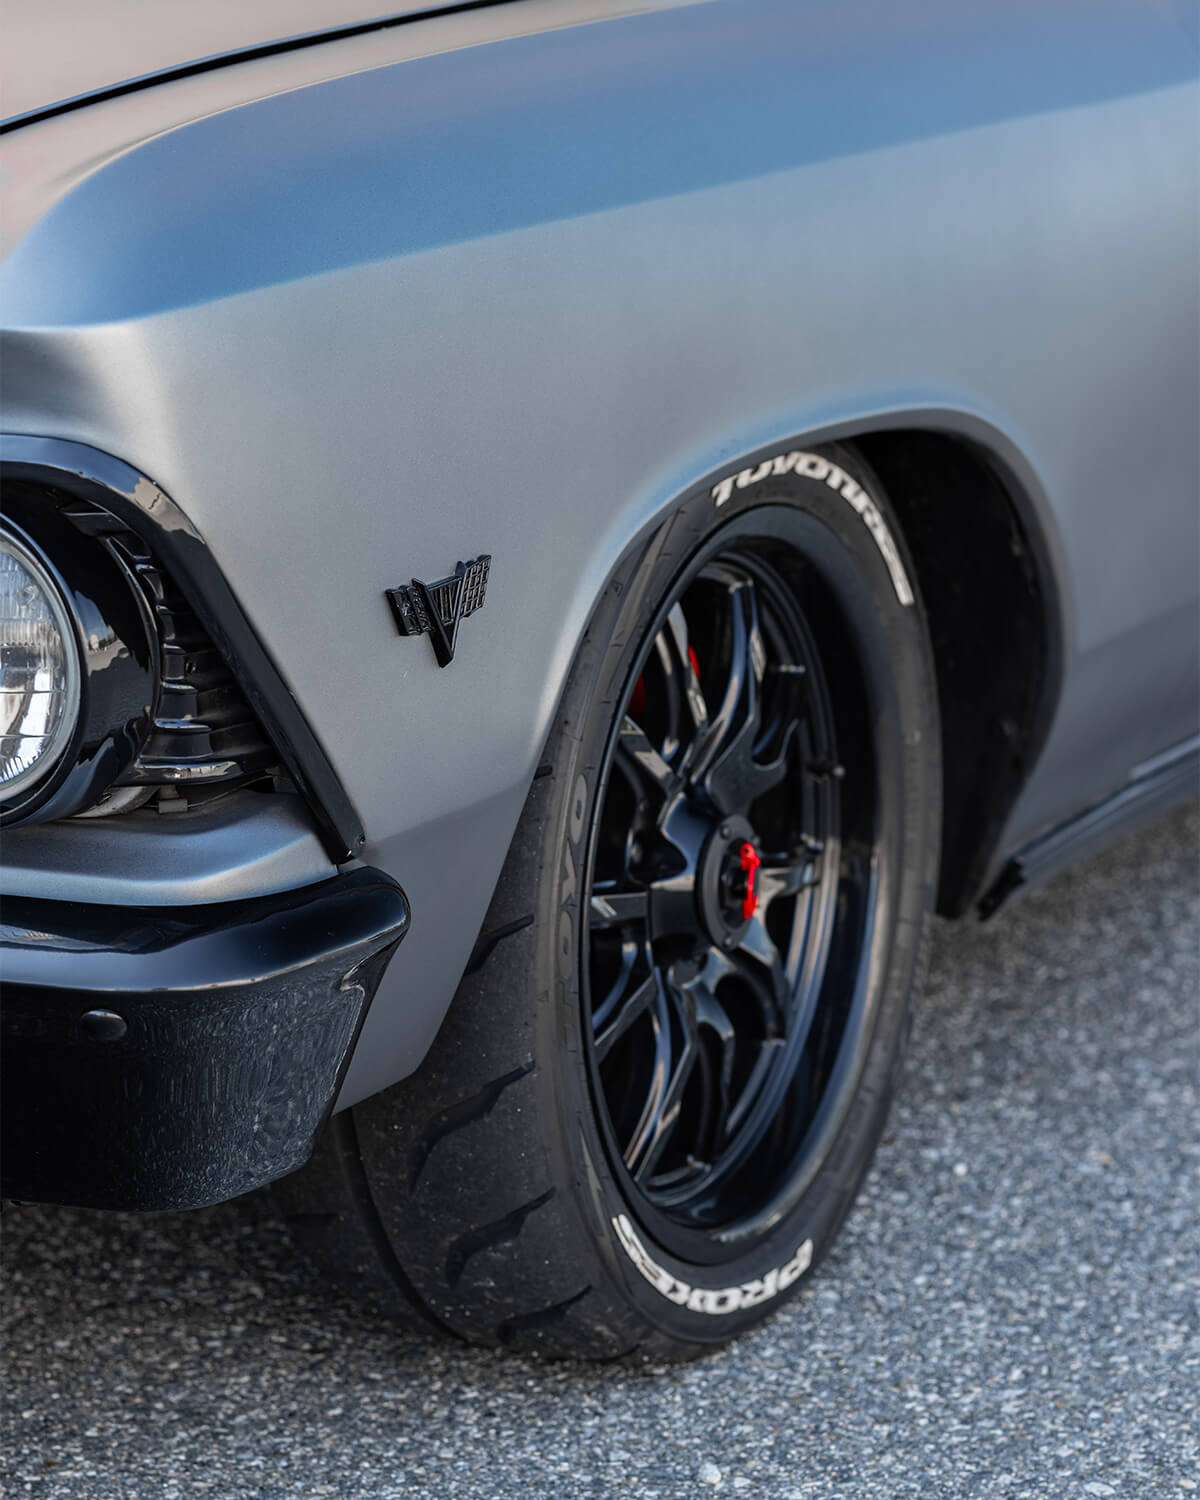 1966 Chevelle SS on Ridler 650 series rims (17×7 front and 18×9.5 rear)